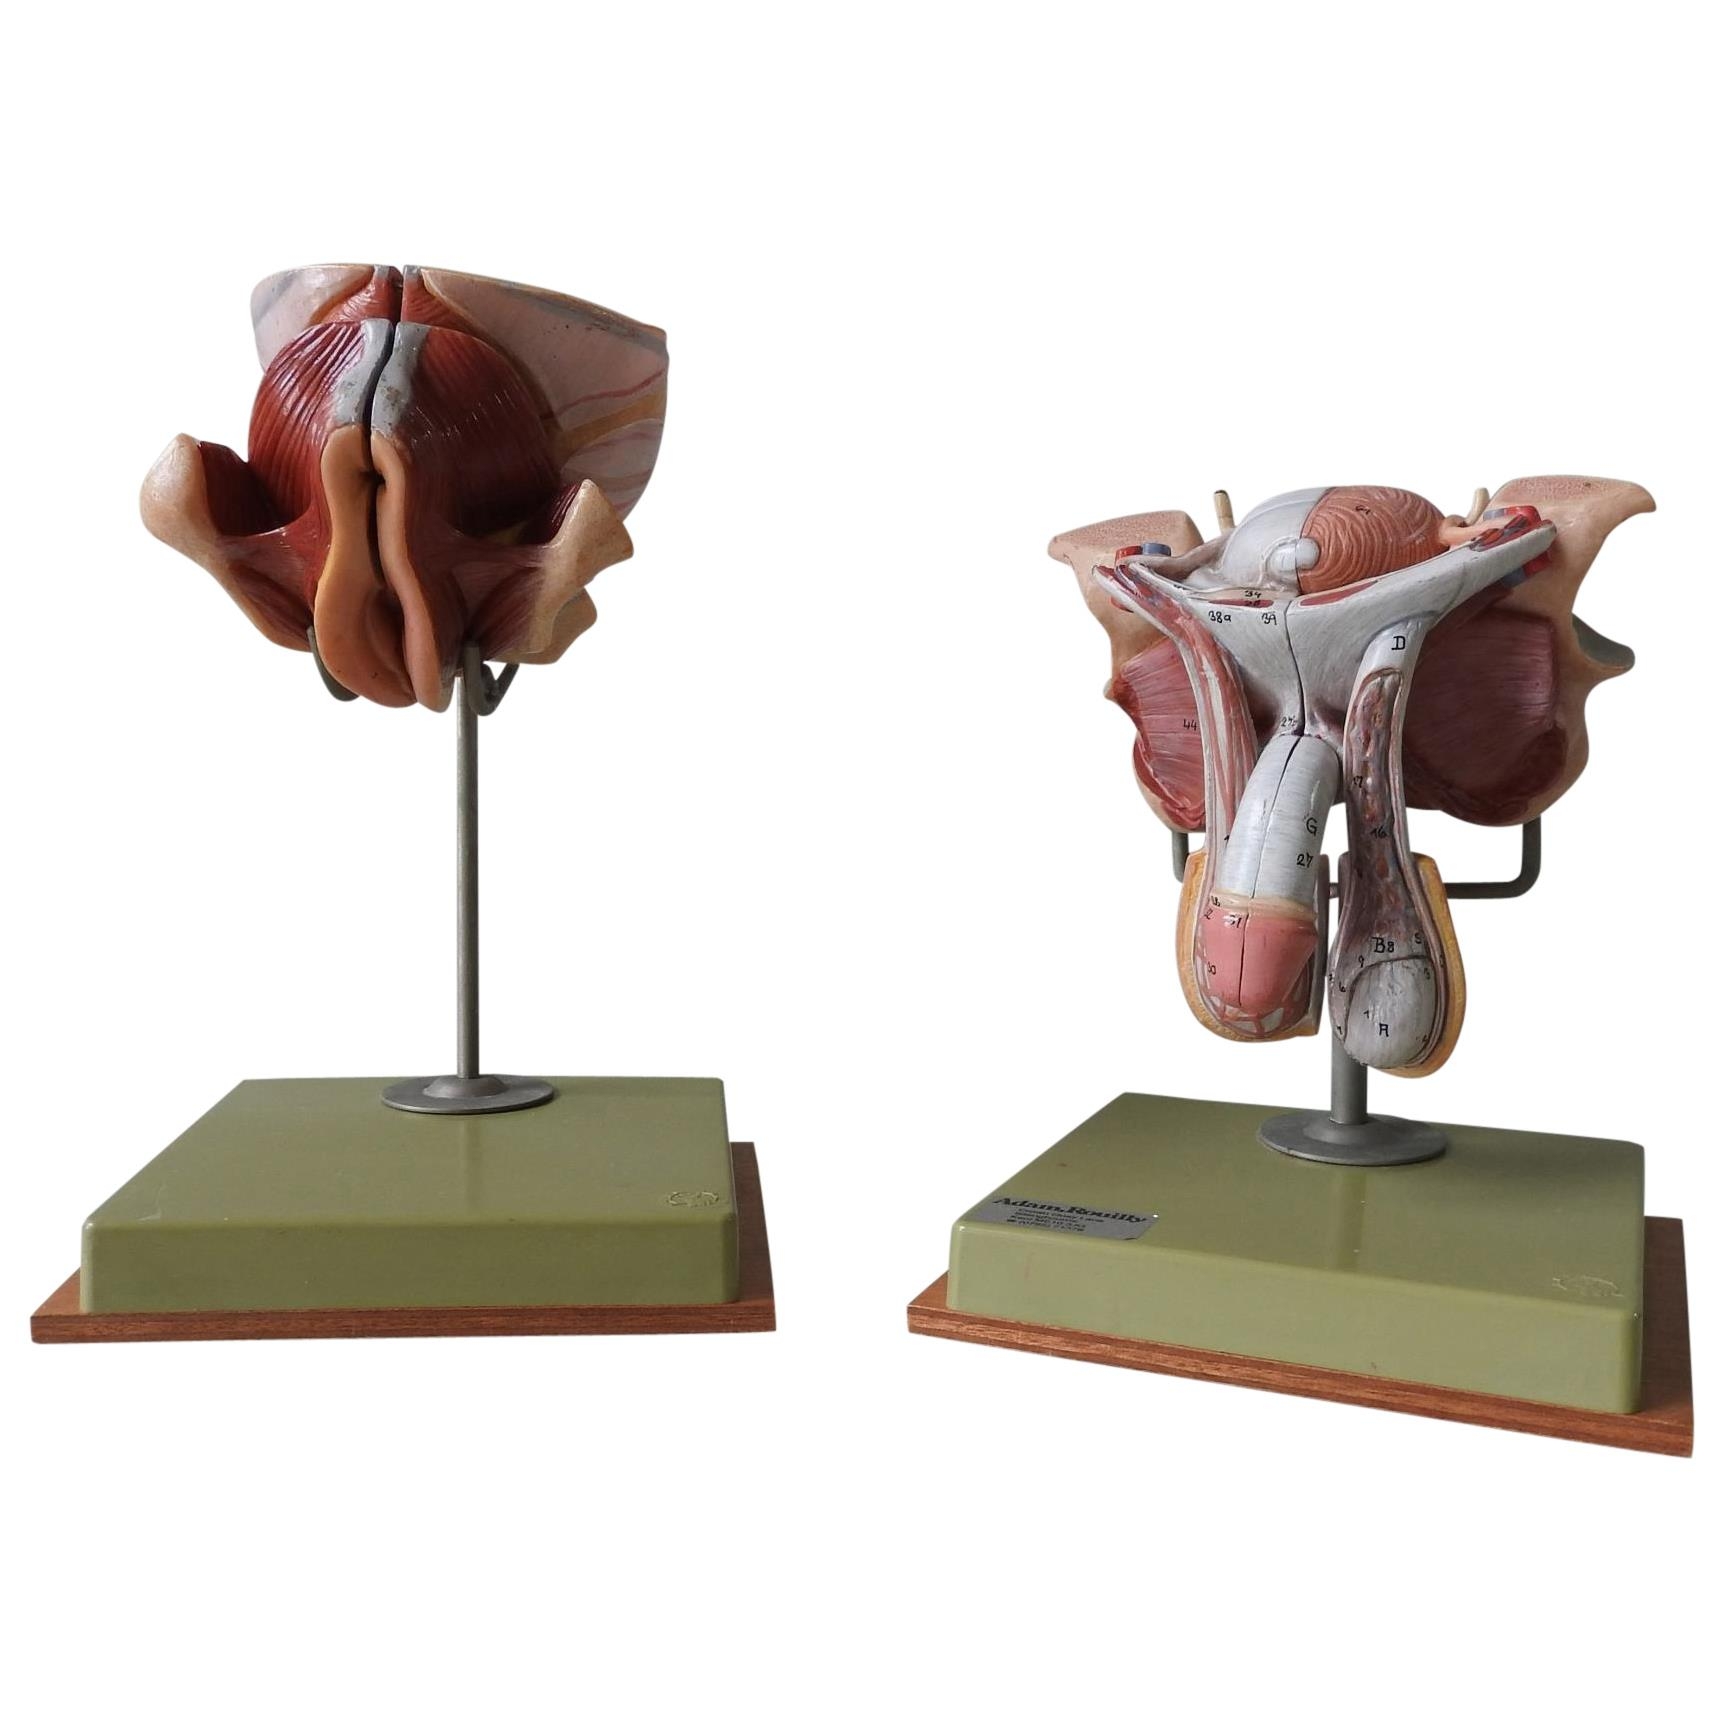 TWO VINTAGE SOMSO ANATOMY MODELS OF MALE AND FEMALE GENITALIA